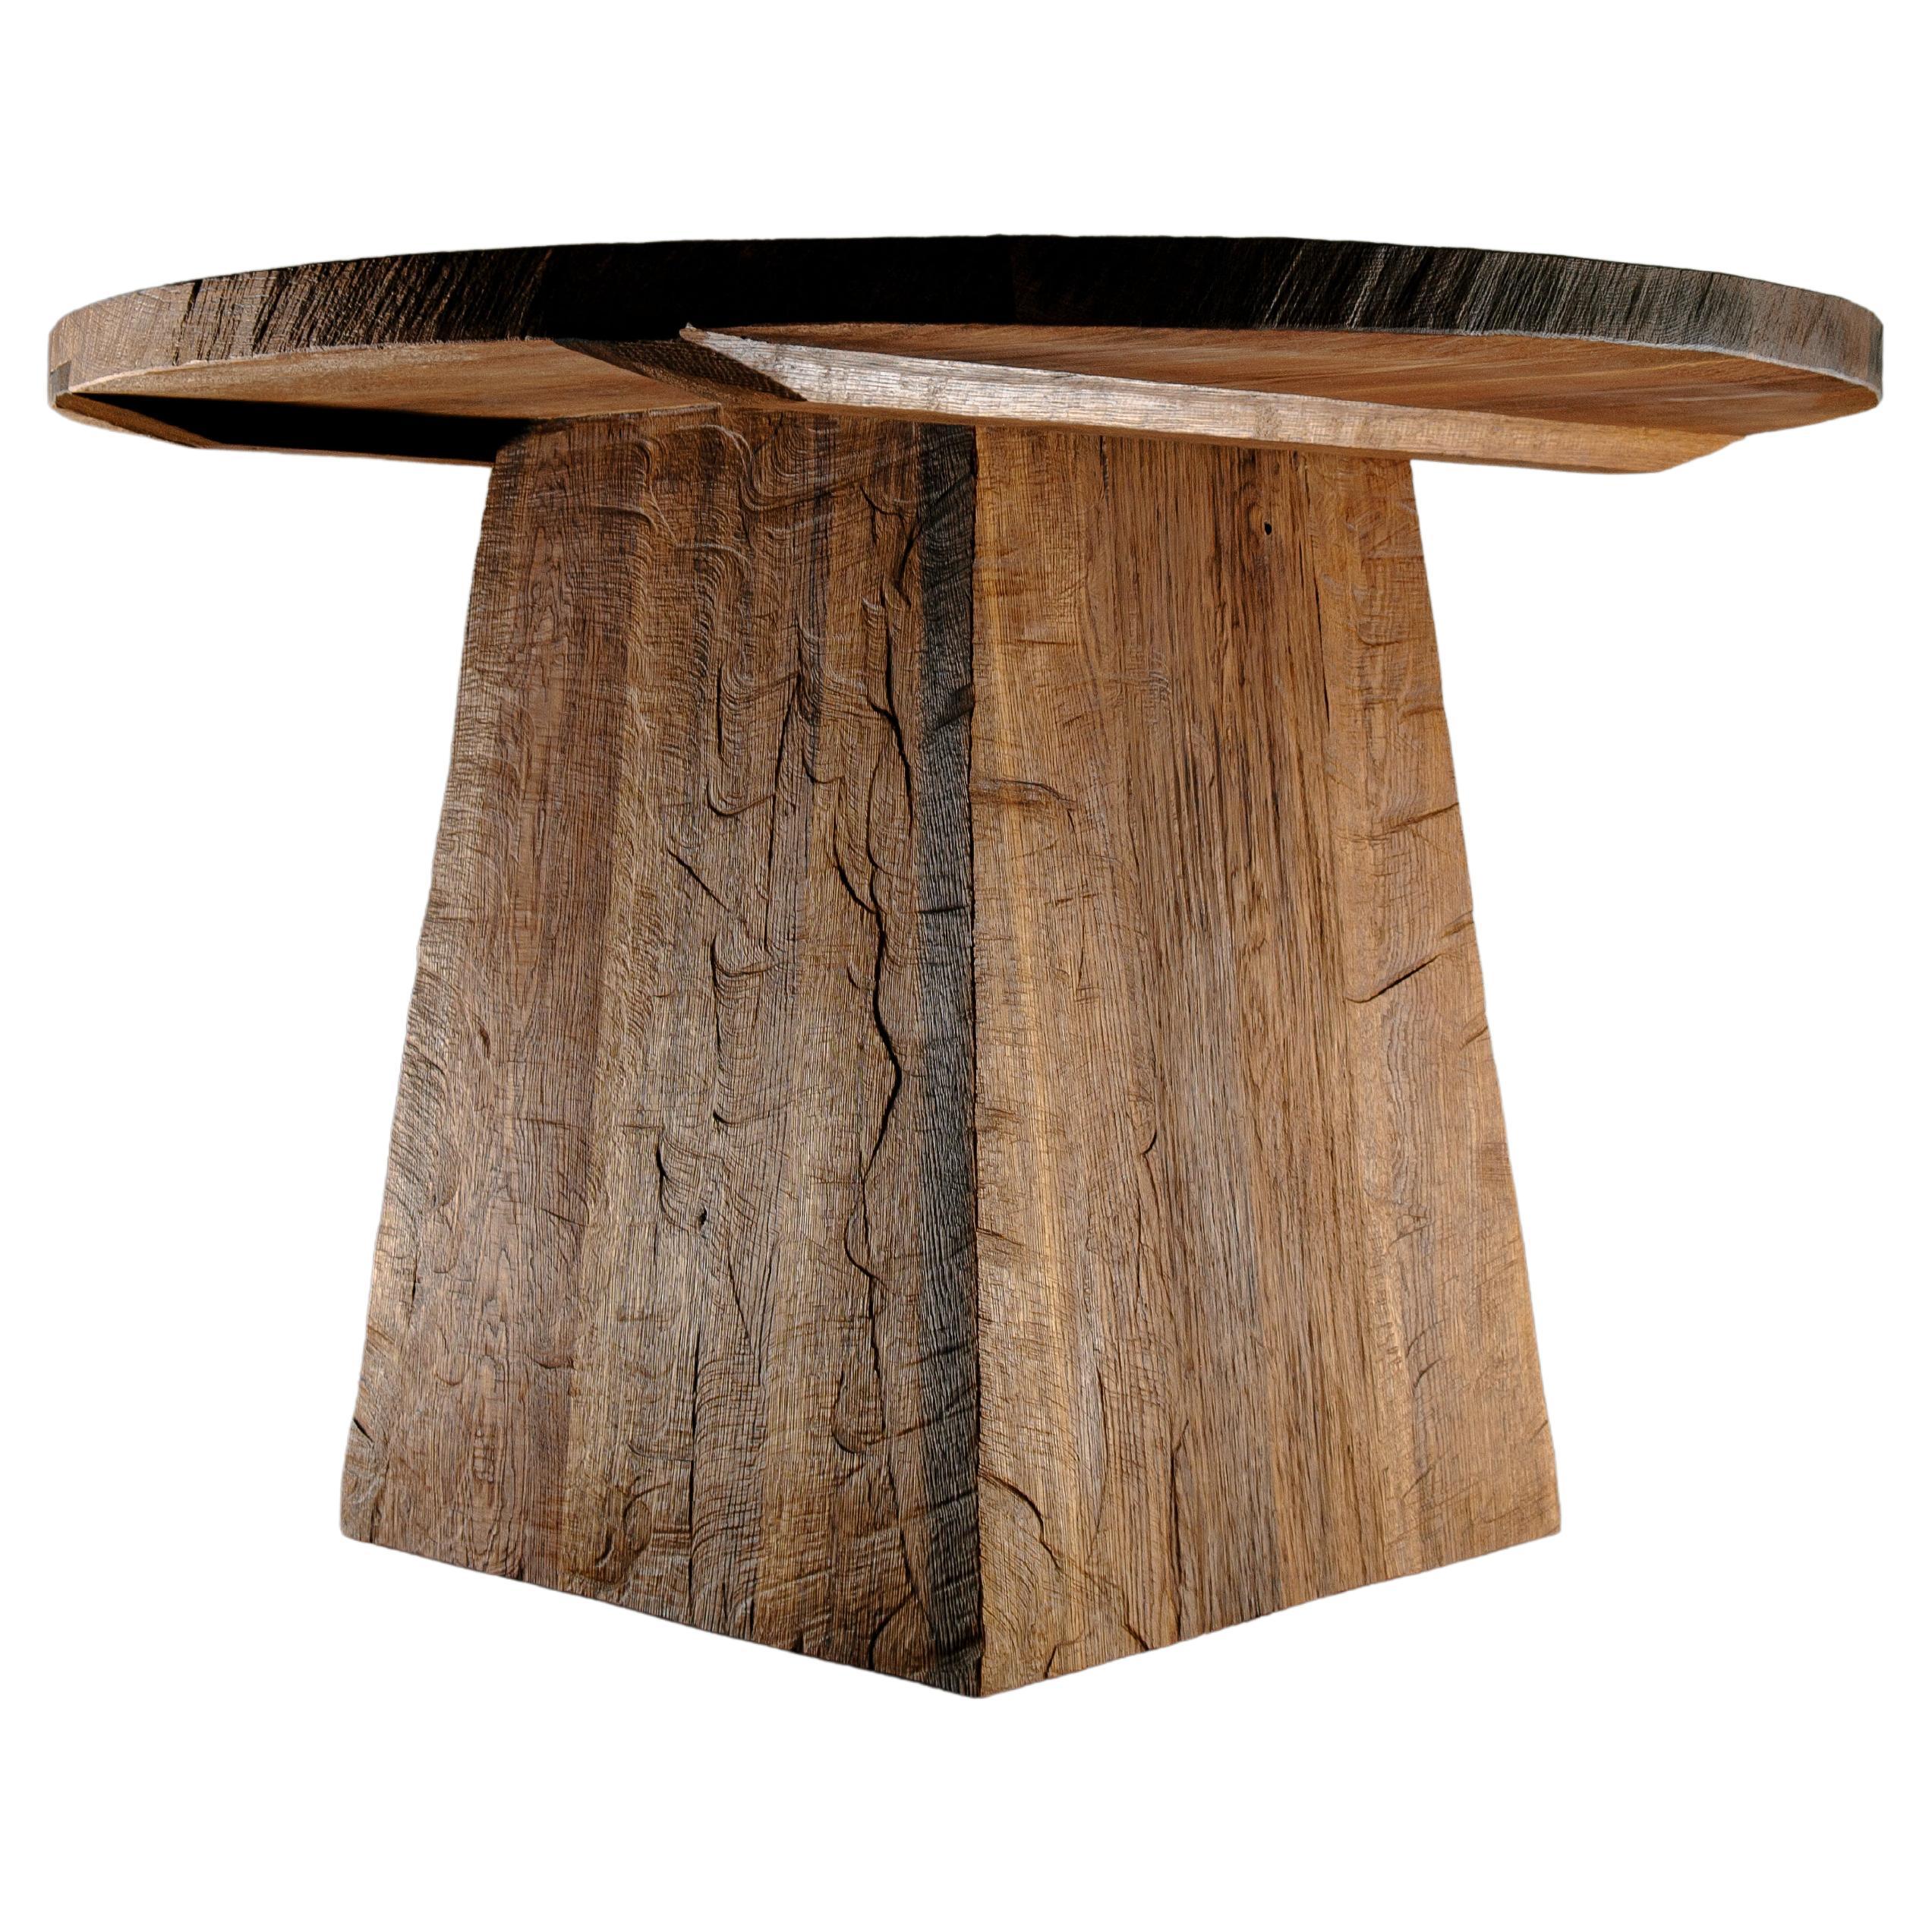 Brutalist center table N1 in Solid Oakwood

Dimensions: 
D. 160 x H. 76 cm

Unique piece made to order.

Founded by artist Denis Milovanov, SÓHA design studio conceives and produces furniture design and decorative objects in solid oak in an